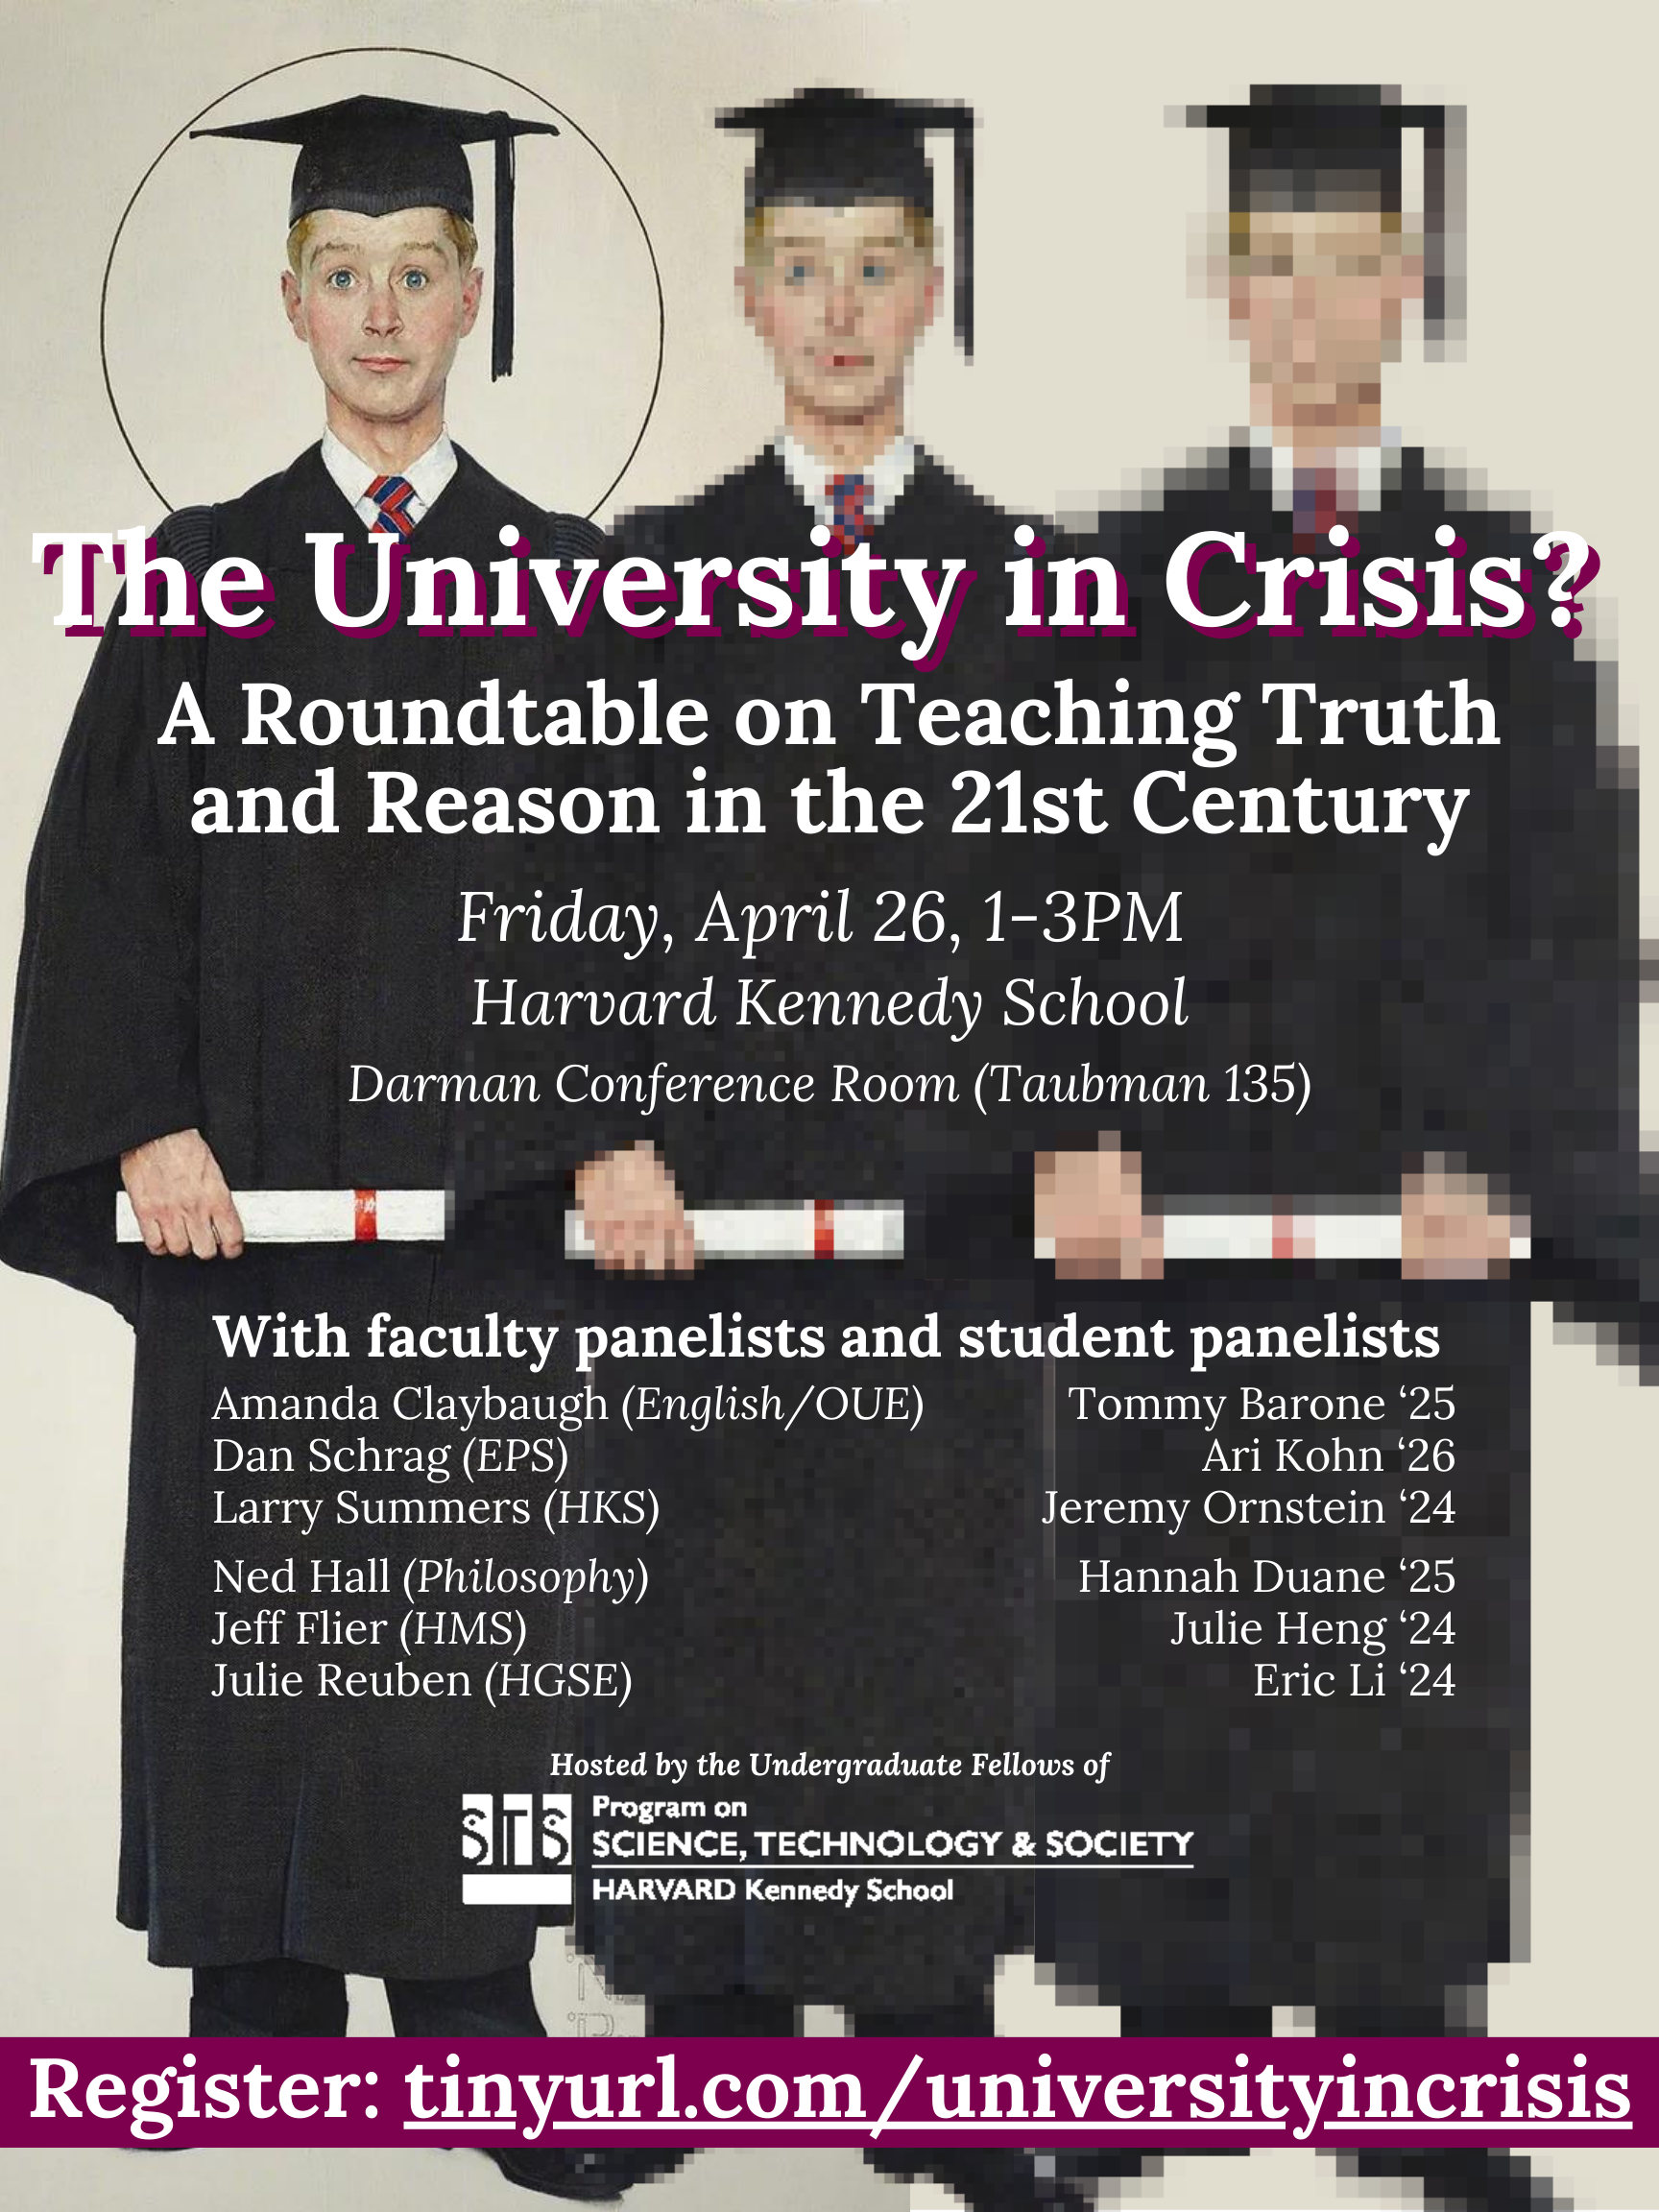 The University in Crisis? event poster